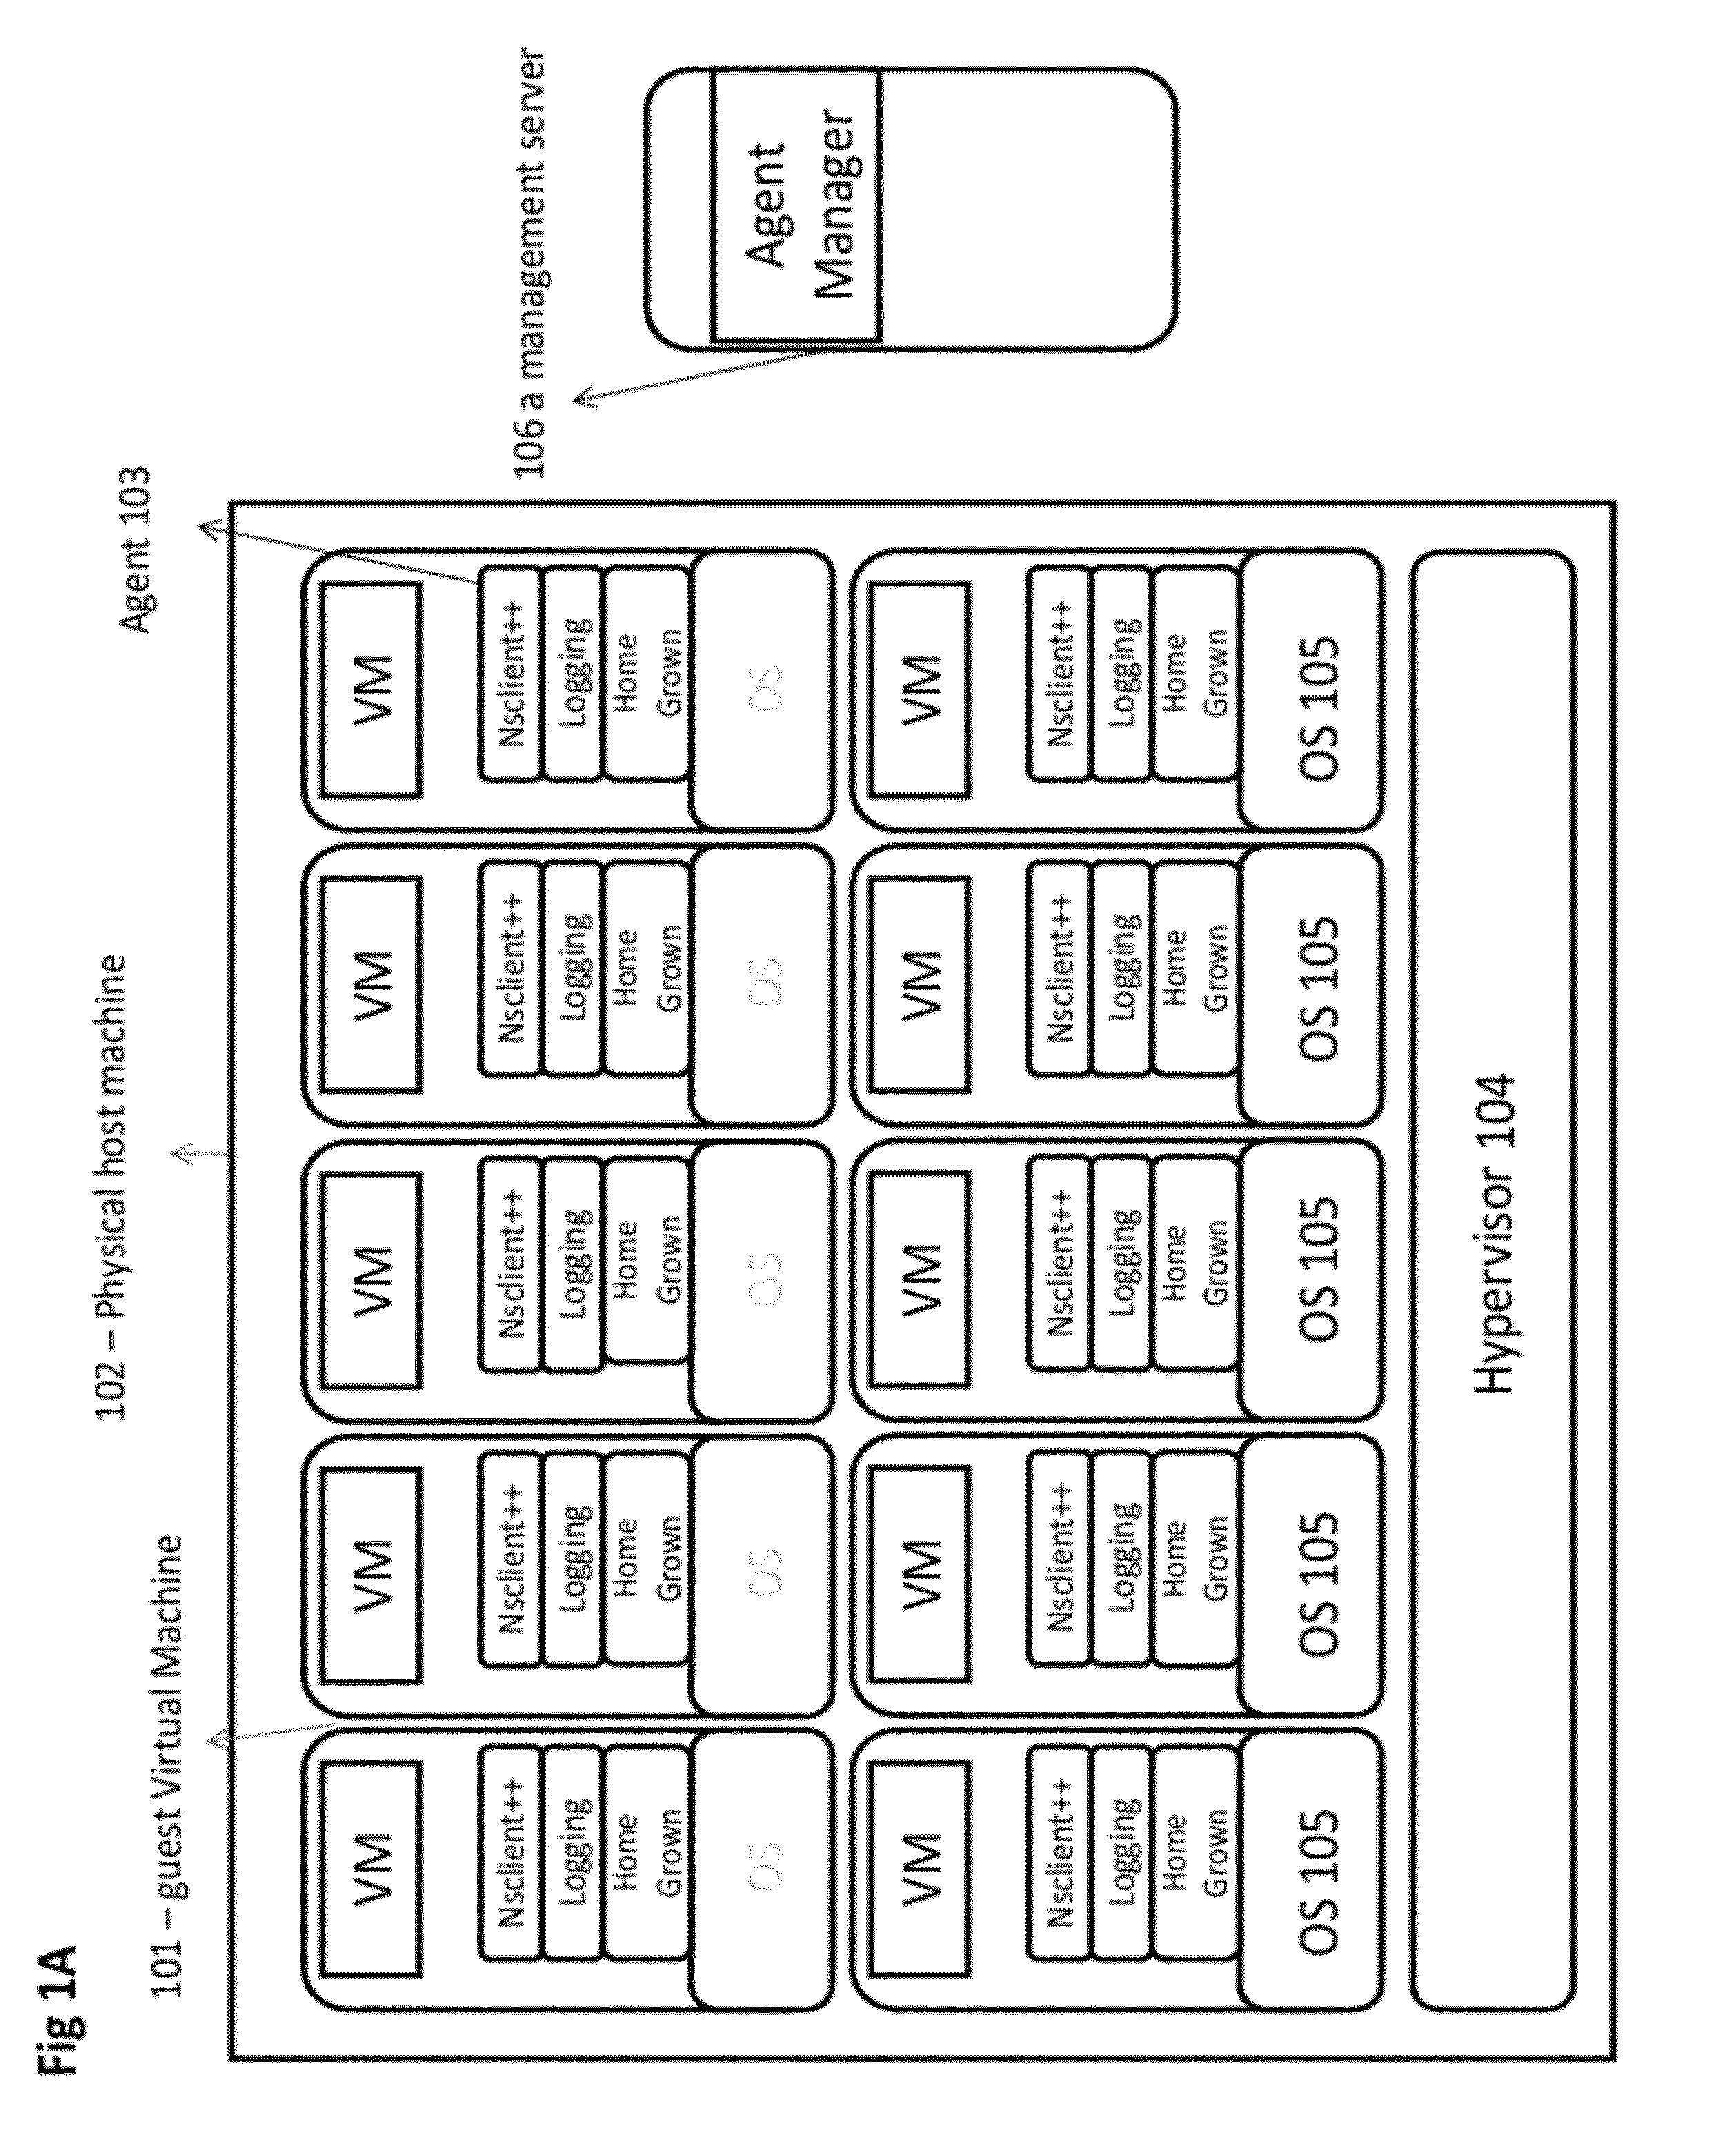 System and method for management of a virtual machine environment